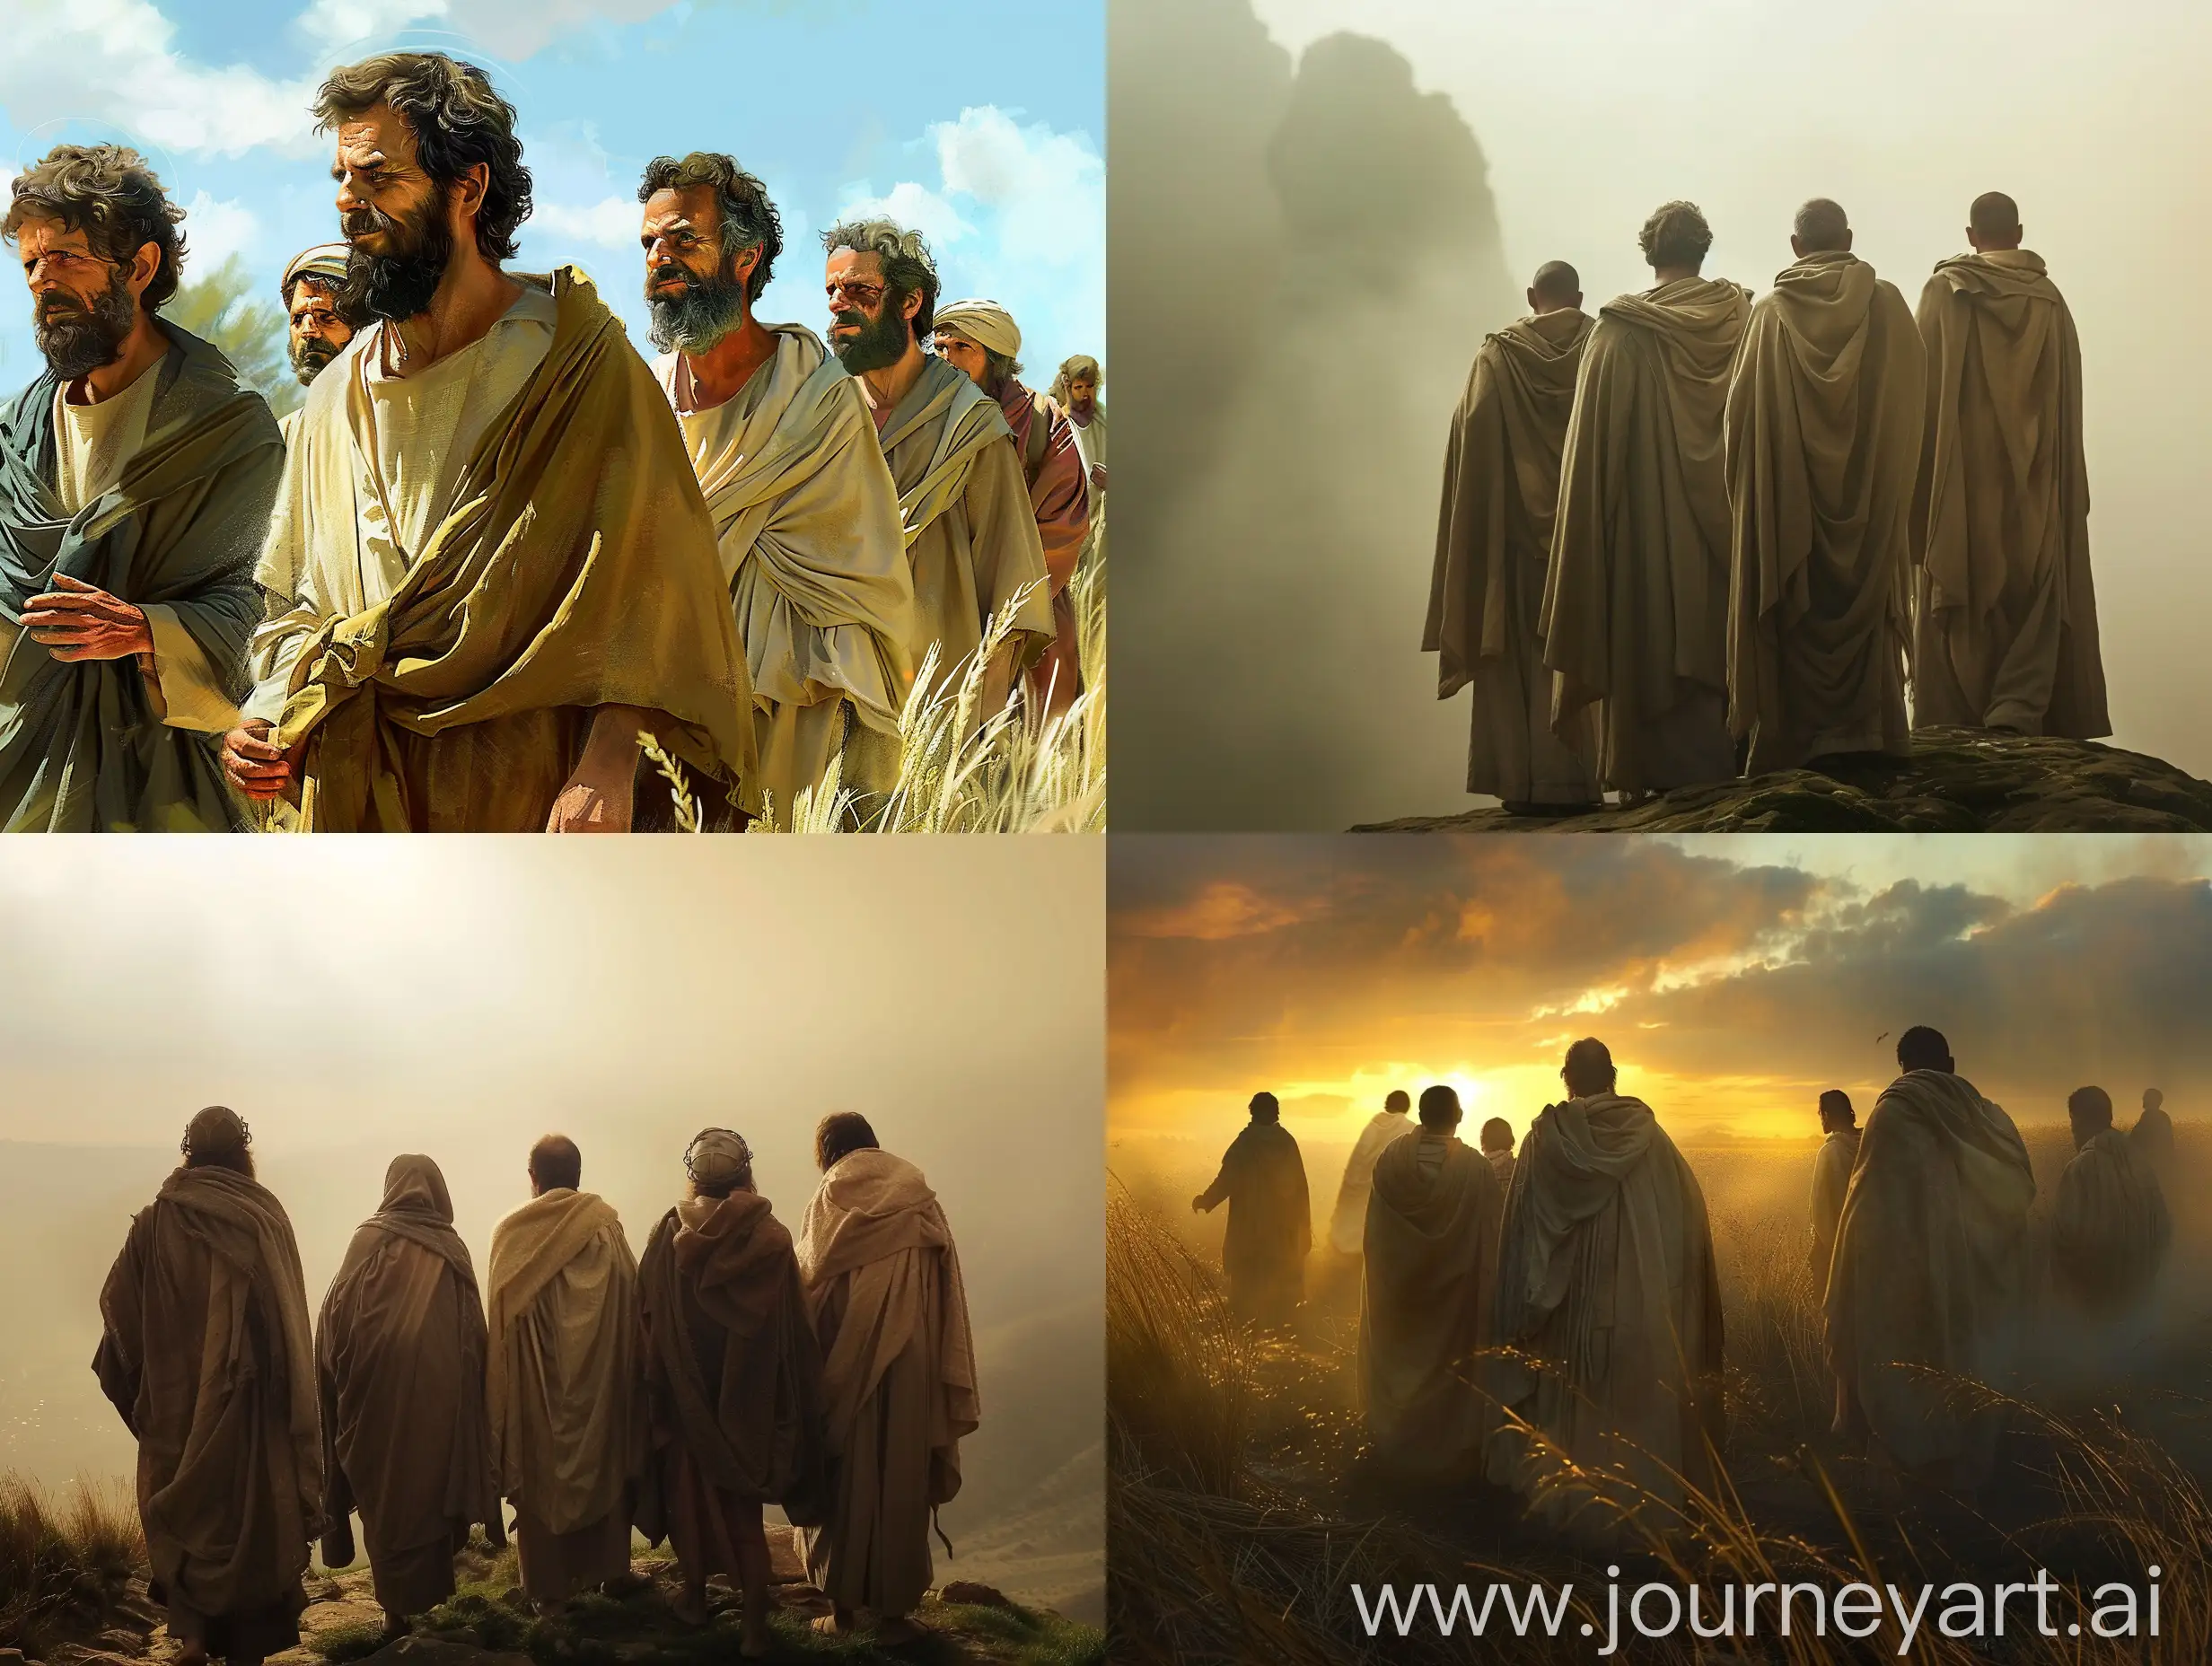 Apostles-of-Jesus-Meeting-Their-Ends-Depicted-in-AI-Art